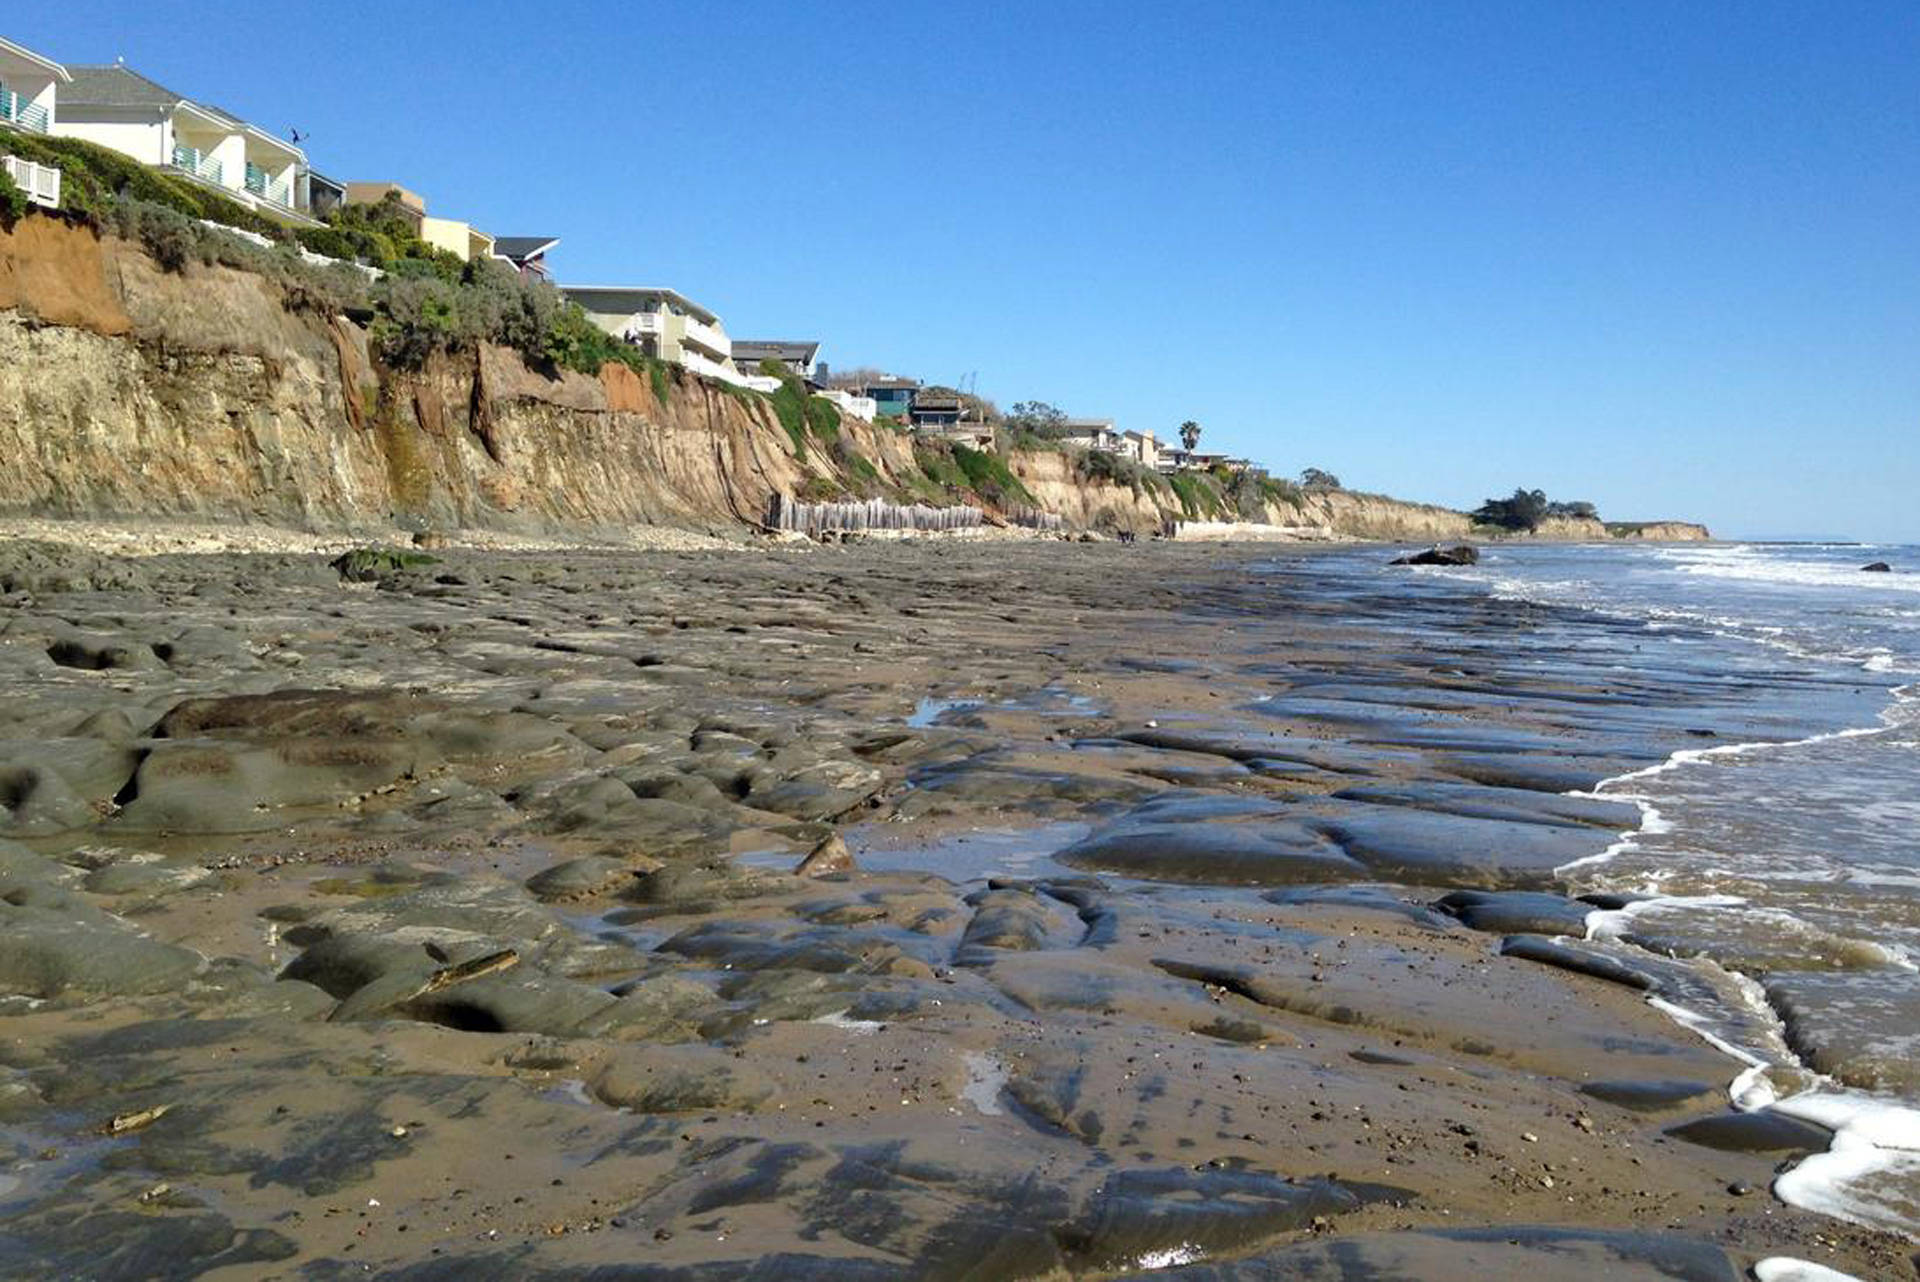 Bedrock is exposed at low tide along the beach at Isla Vista.  Alex Snyder/USGS